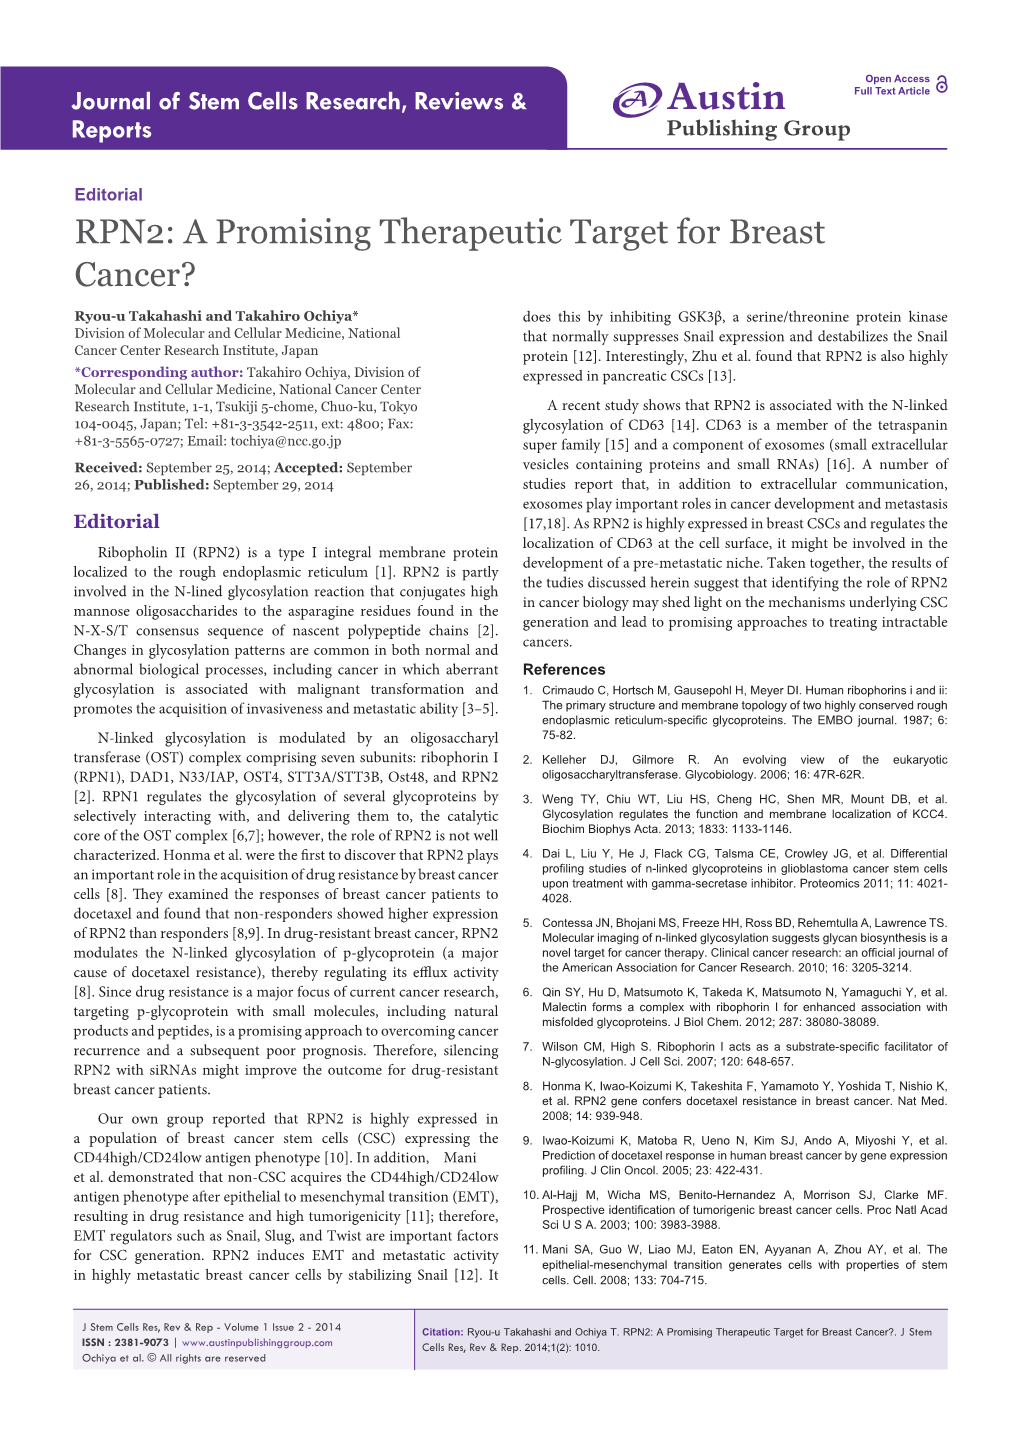 RPN2: a Promising Therapeutic Target for Breast Cancer?